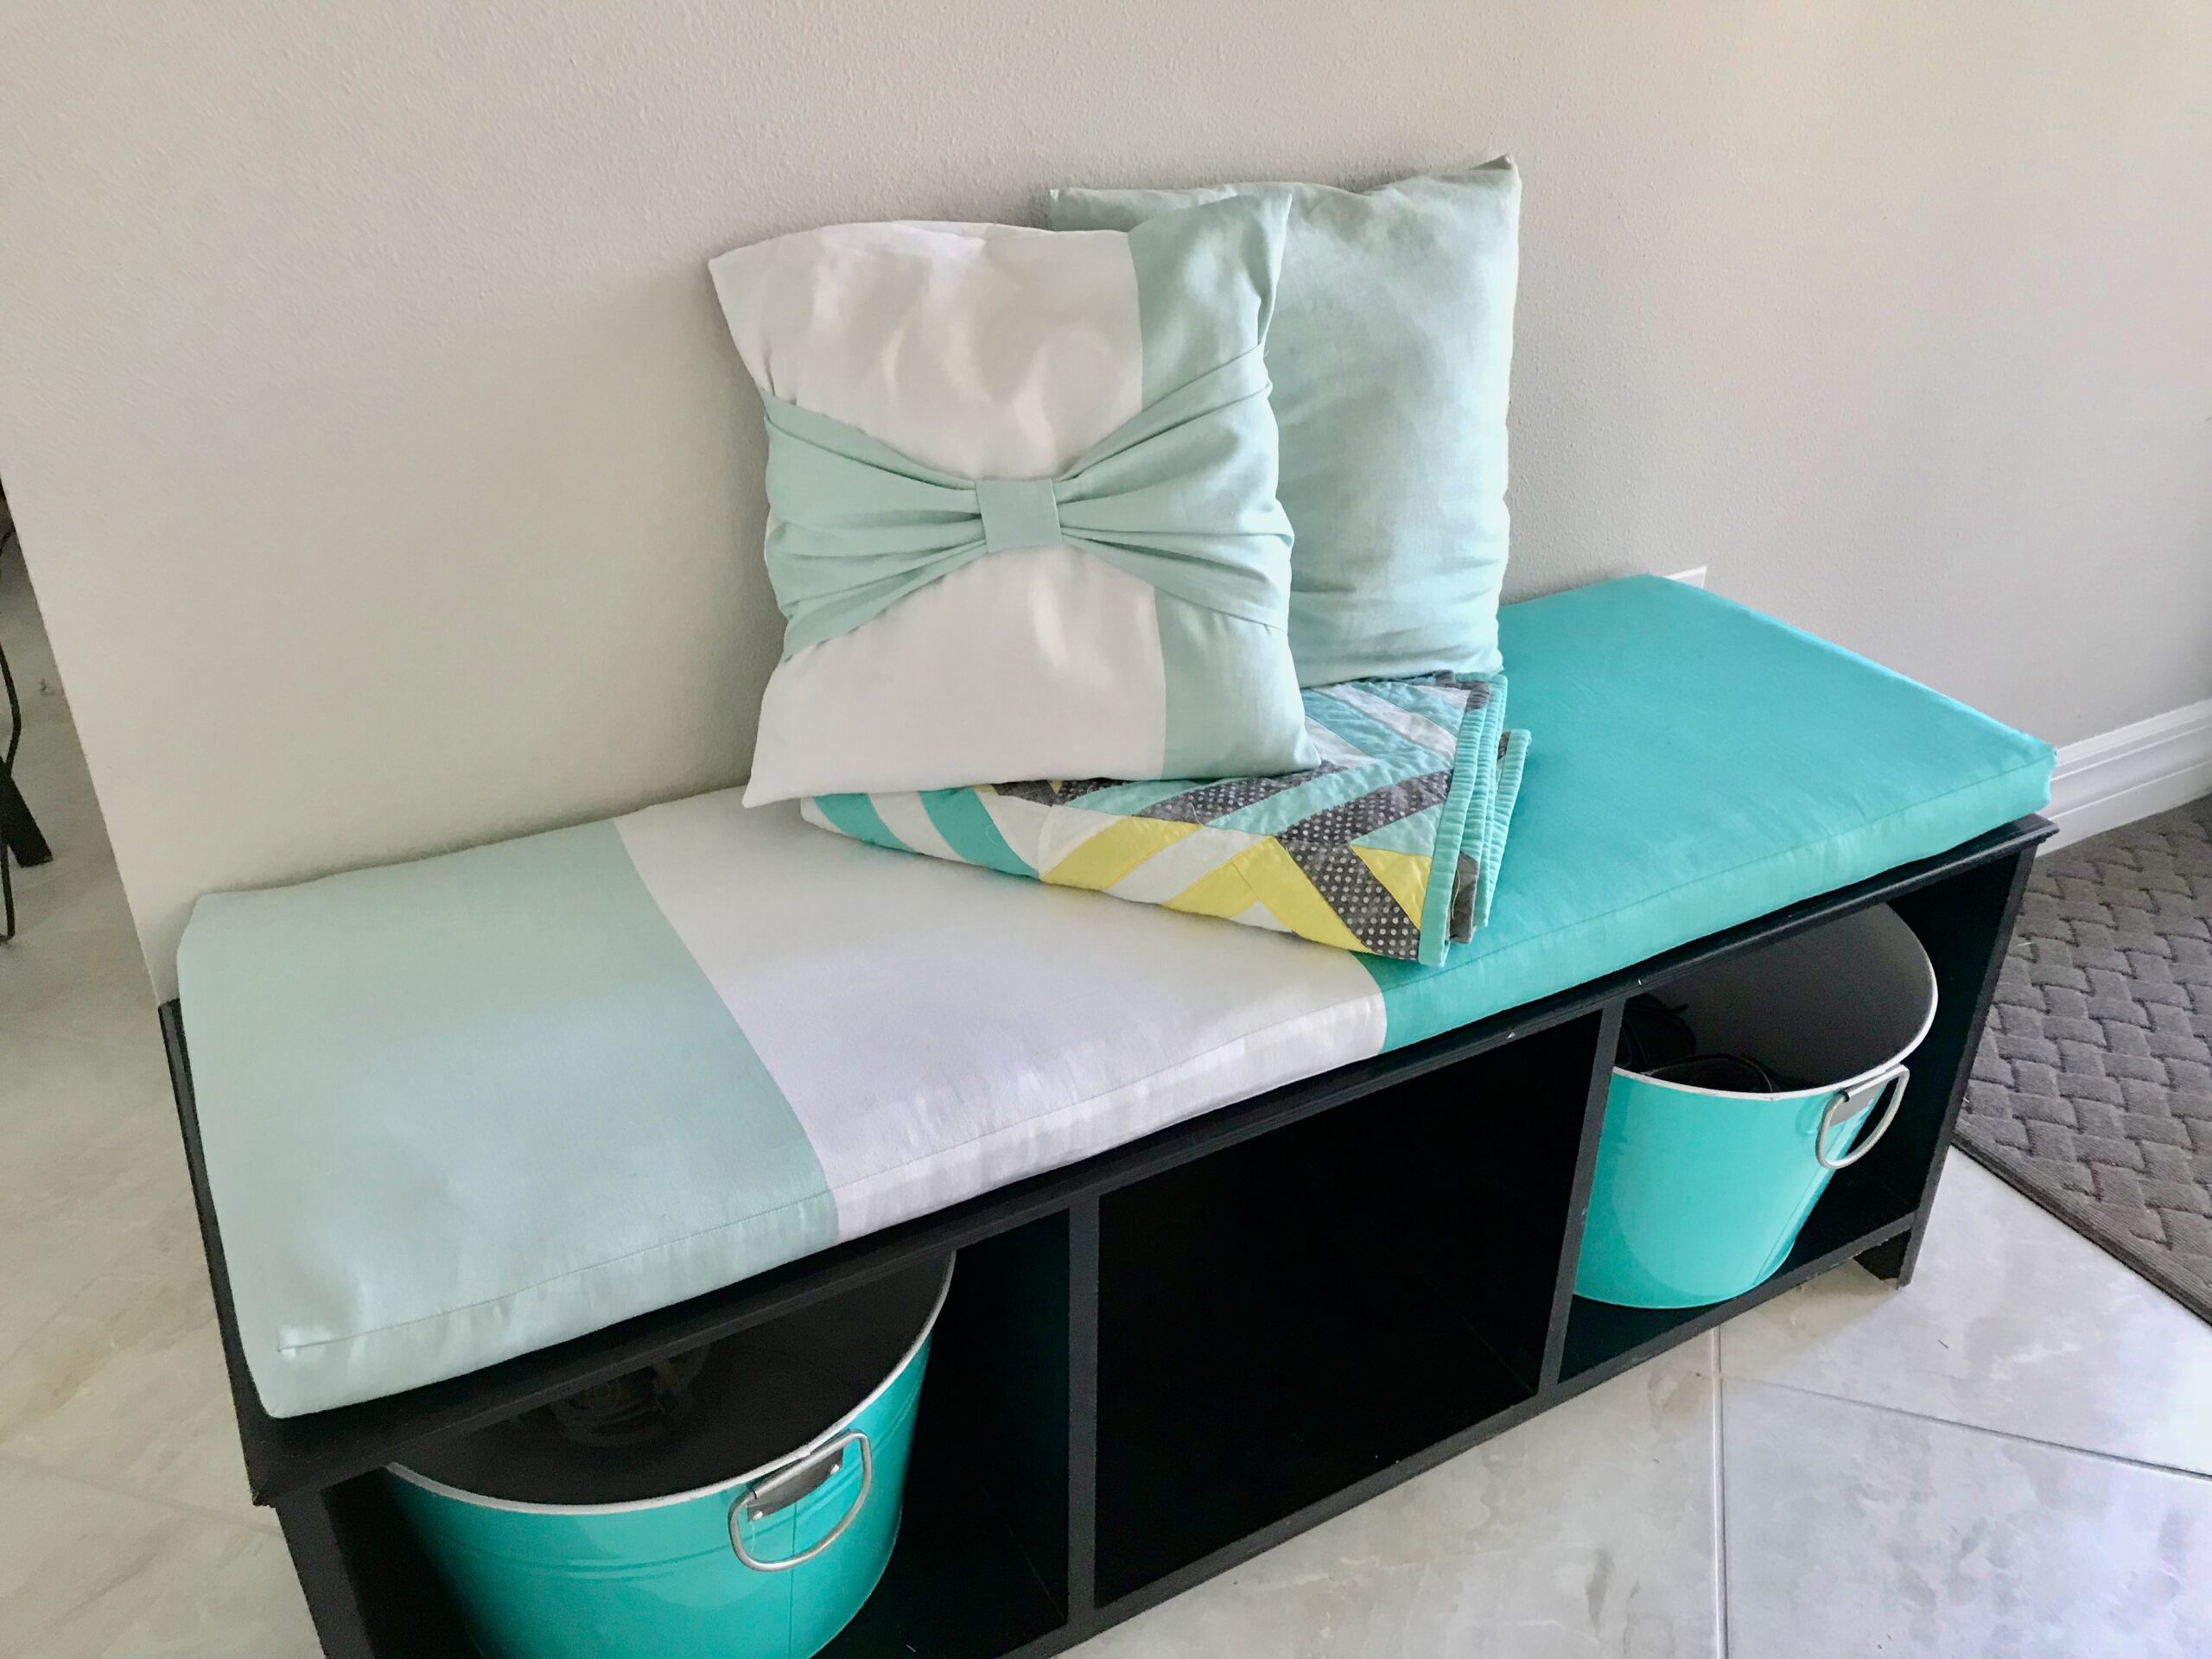 DIY Bench Seat Cushion—Upholster A Cushion Without Sewing!